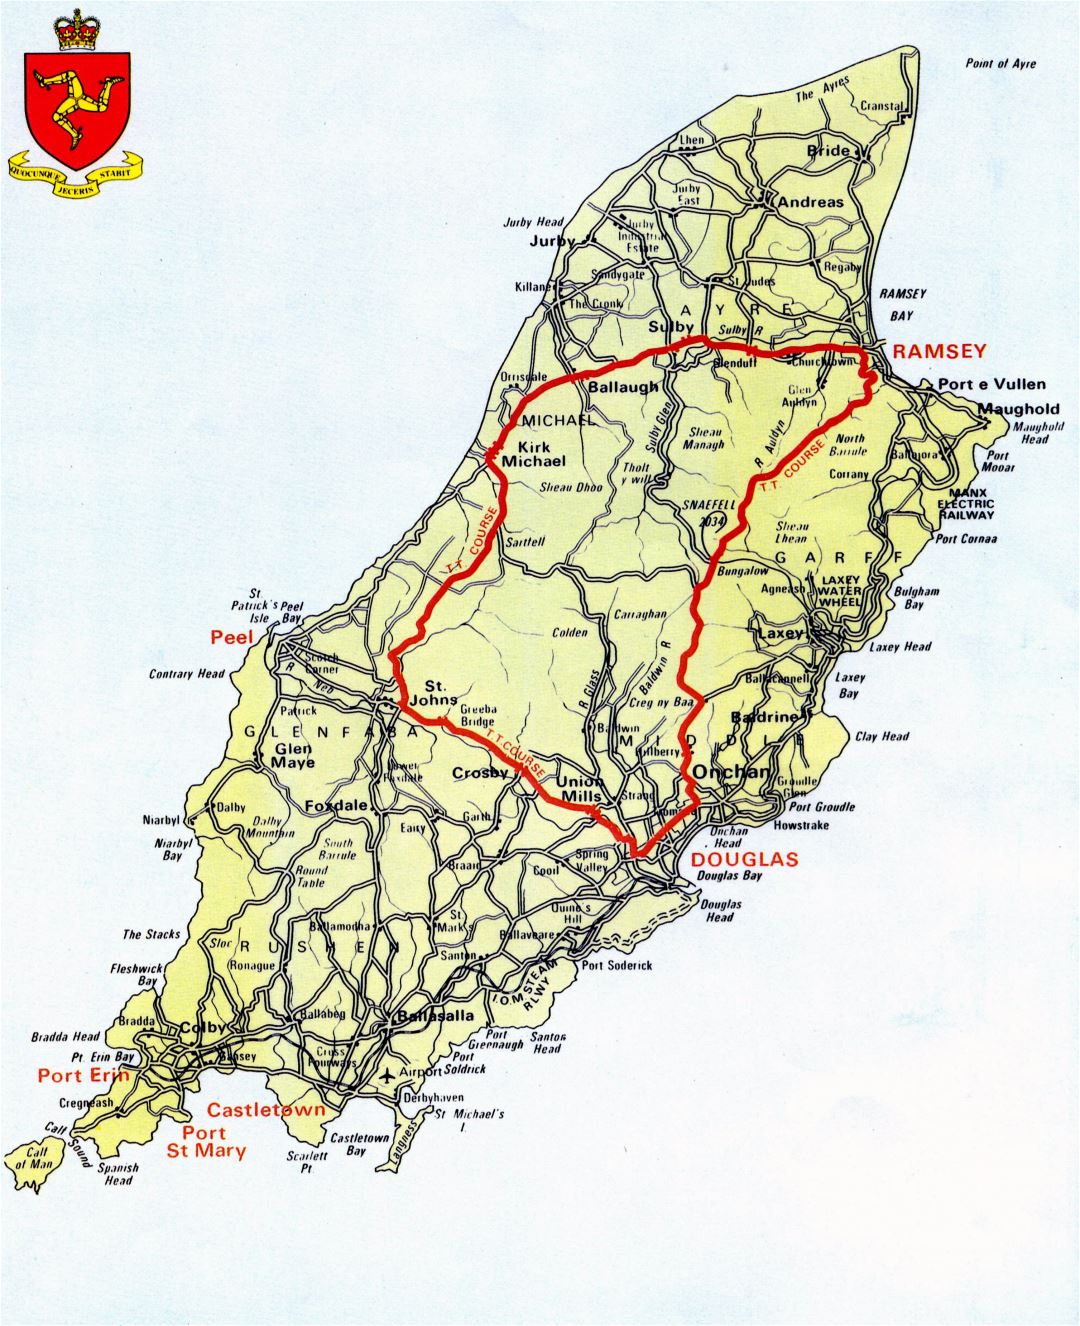 Large scale road map of Isle of Man